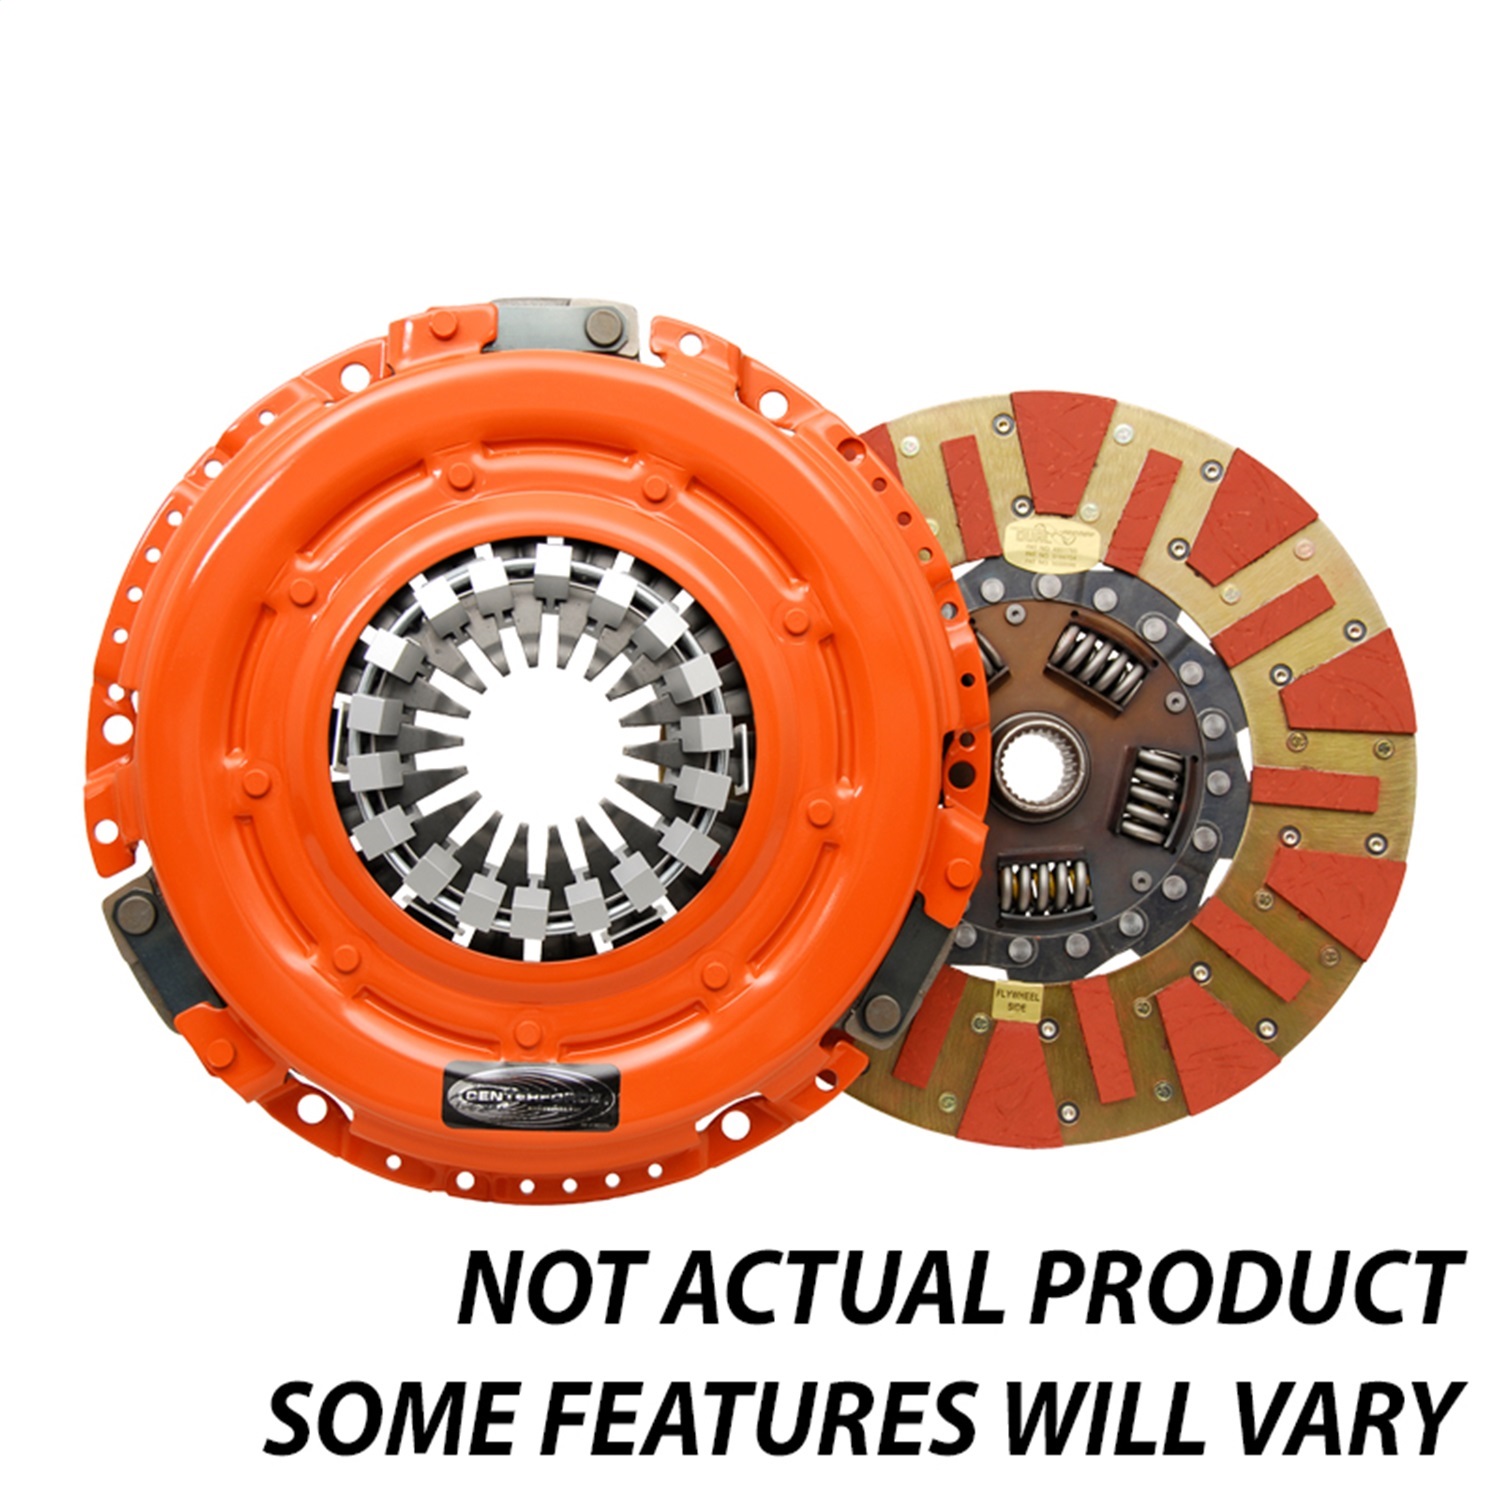 Centerforce Centerforce DF502502 Dual Friction Clutch Pressure Plate And Disc Set Fits 300ZX